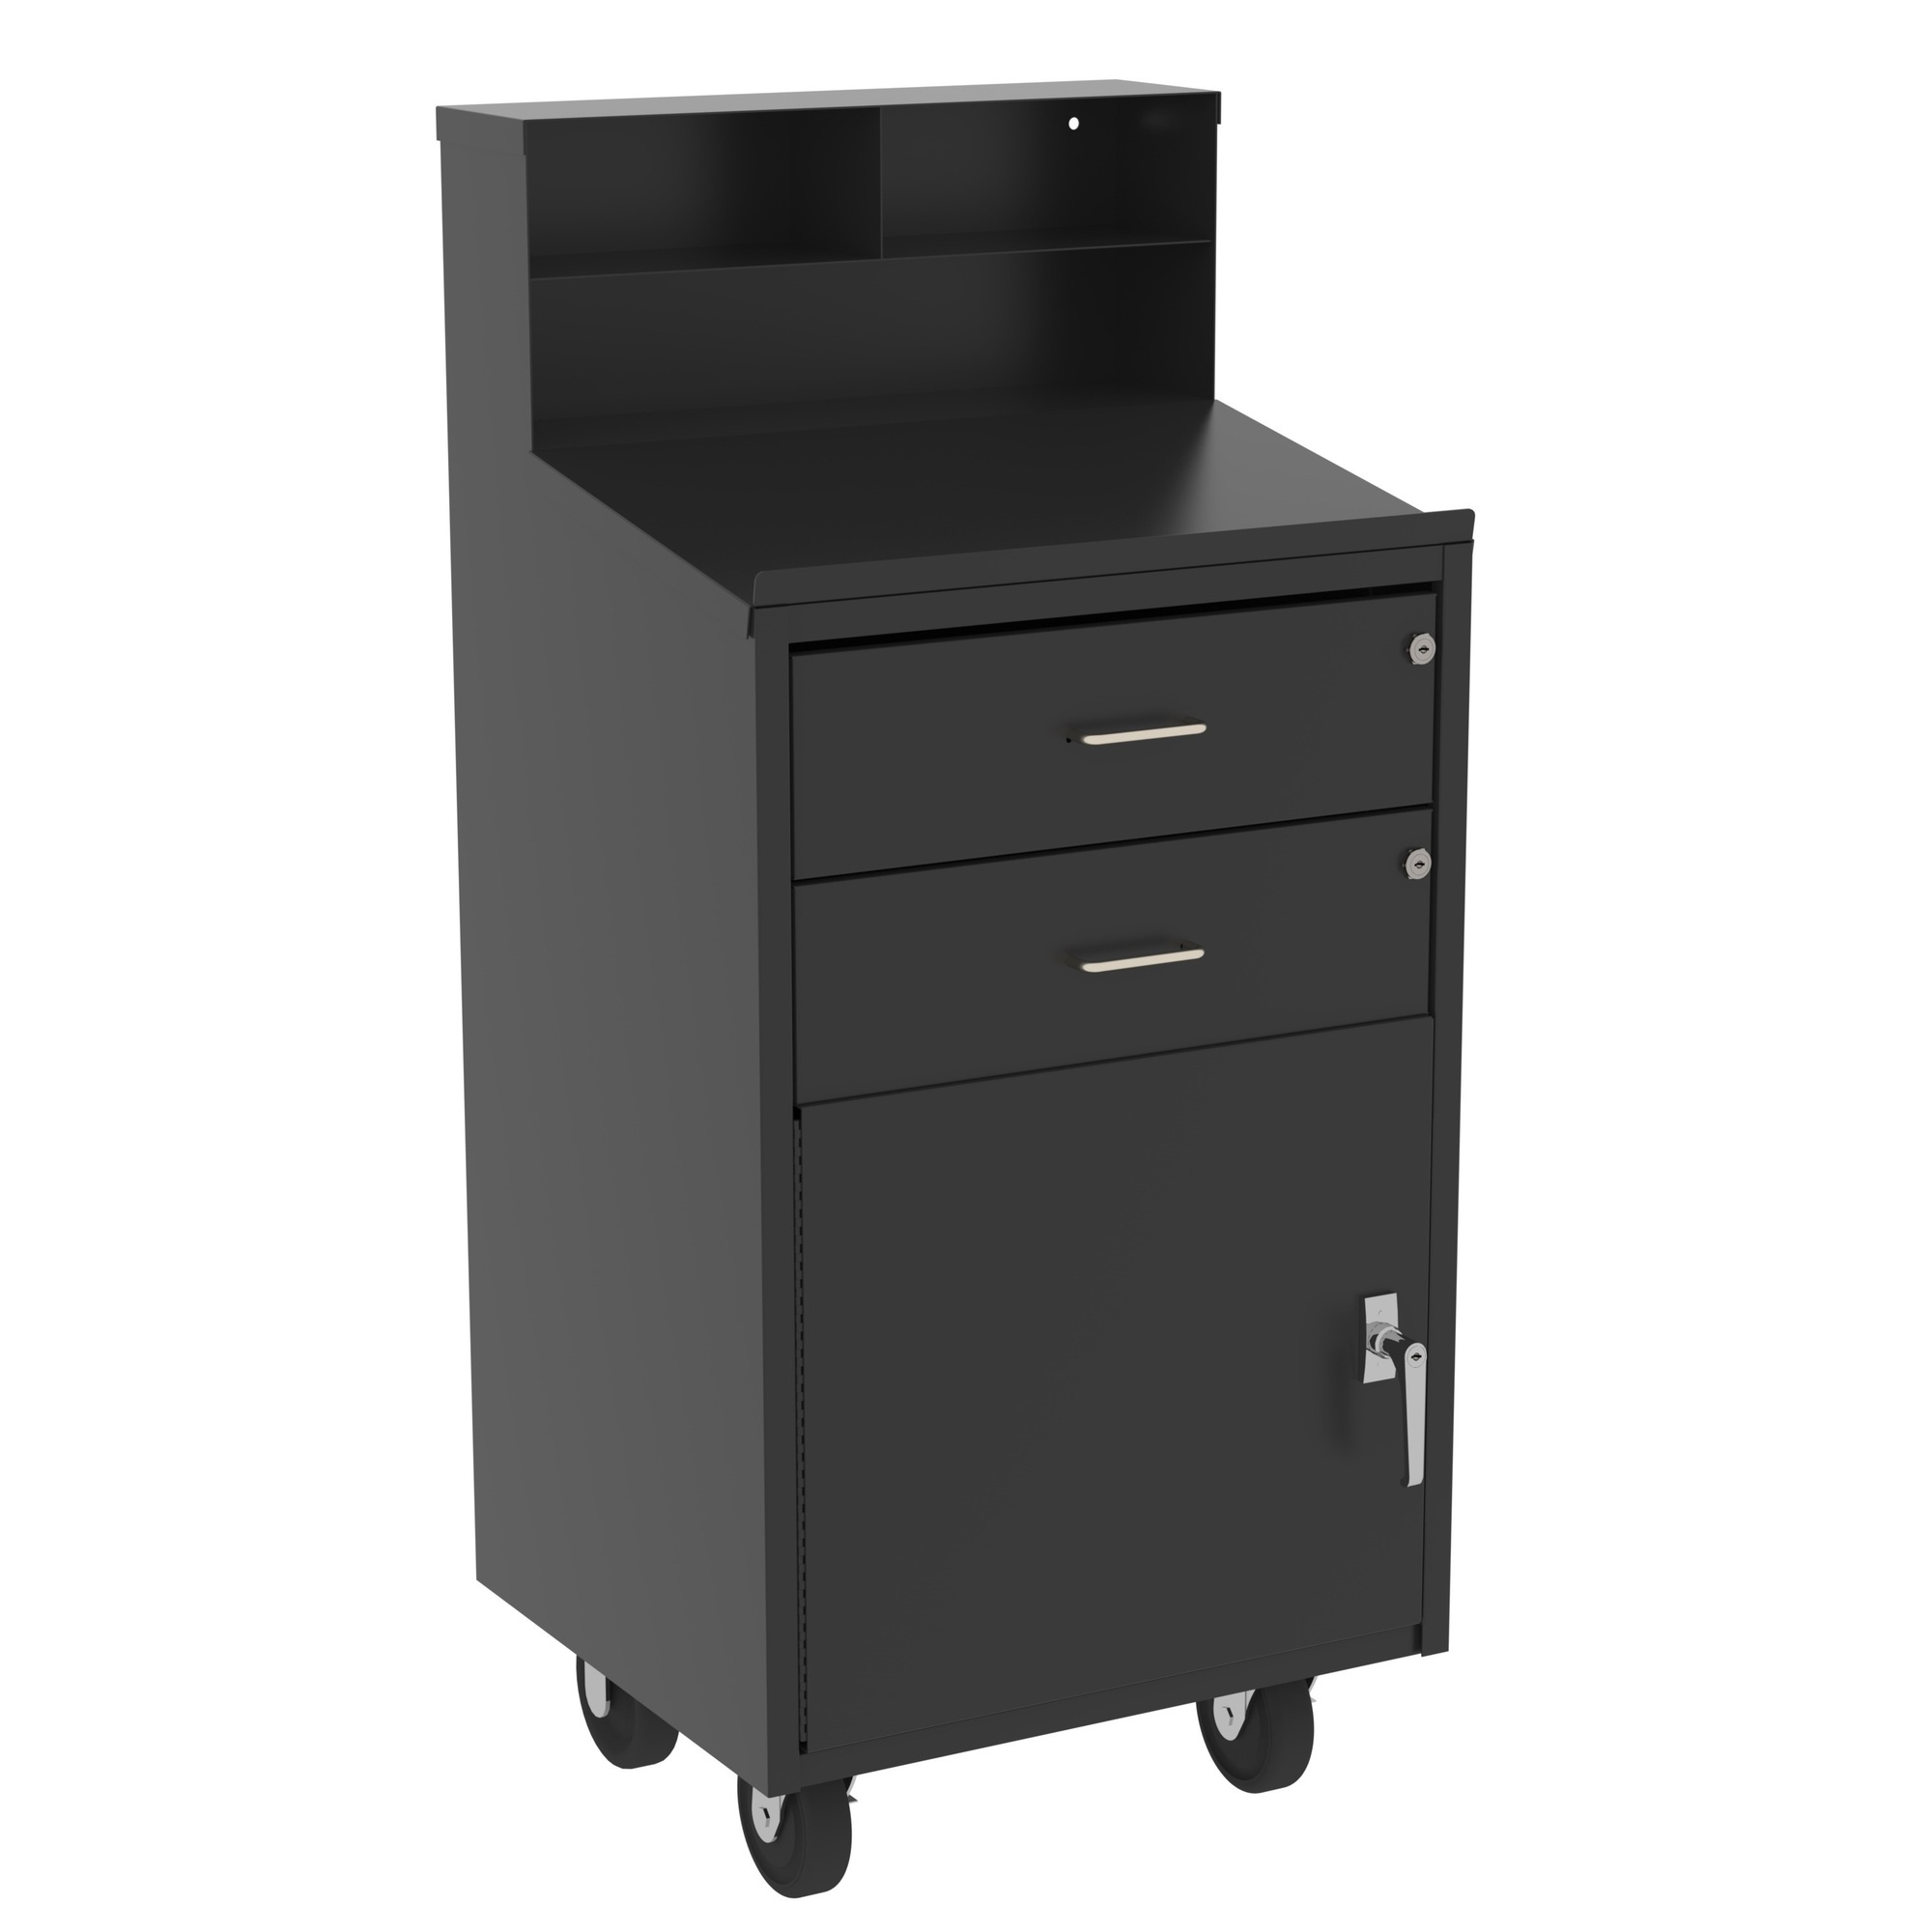 Valley Craft, Mobile Shop Desk, Width 23 in, Depth 20 in, Height 51 in, Model F85829A8